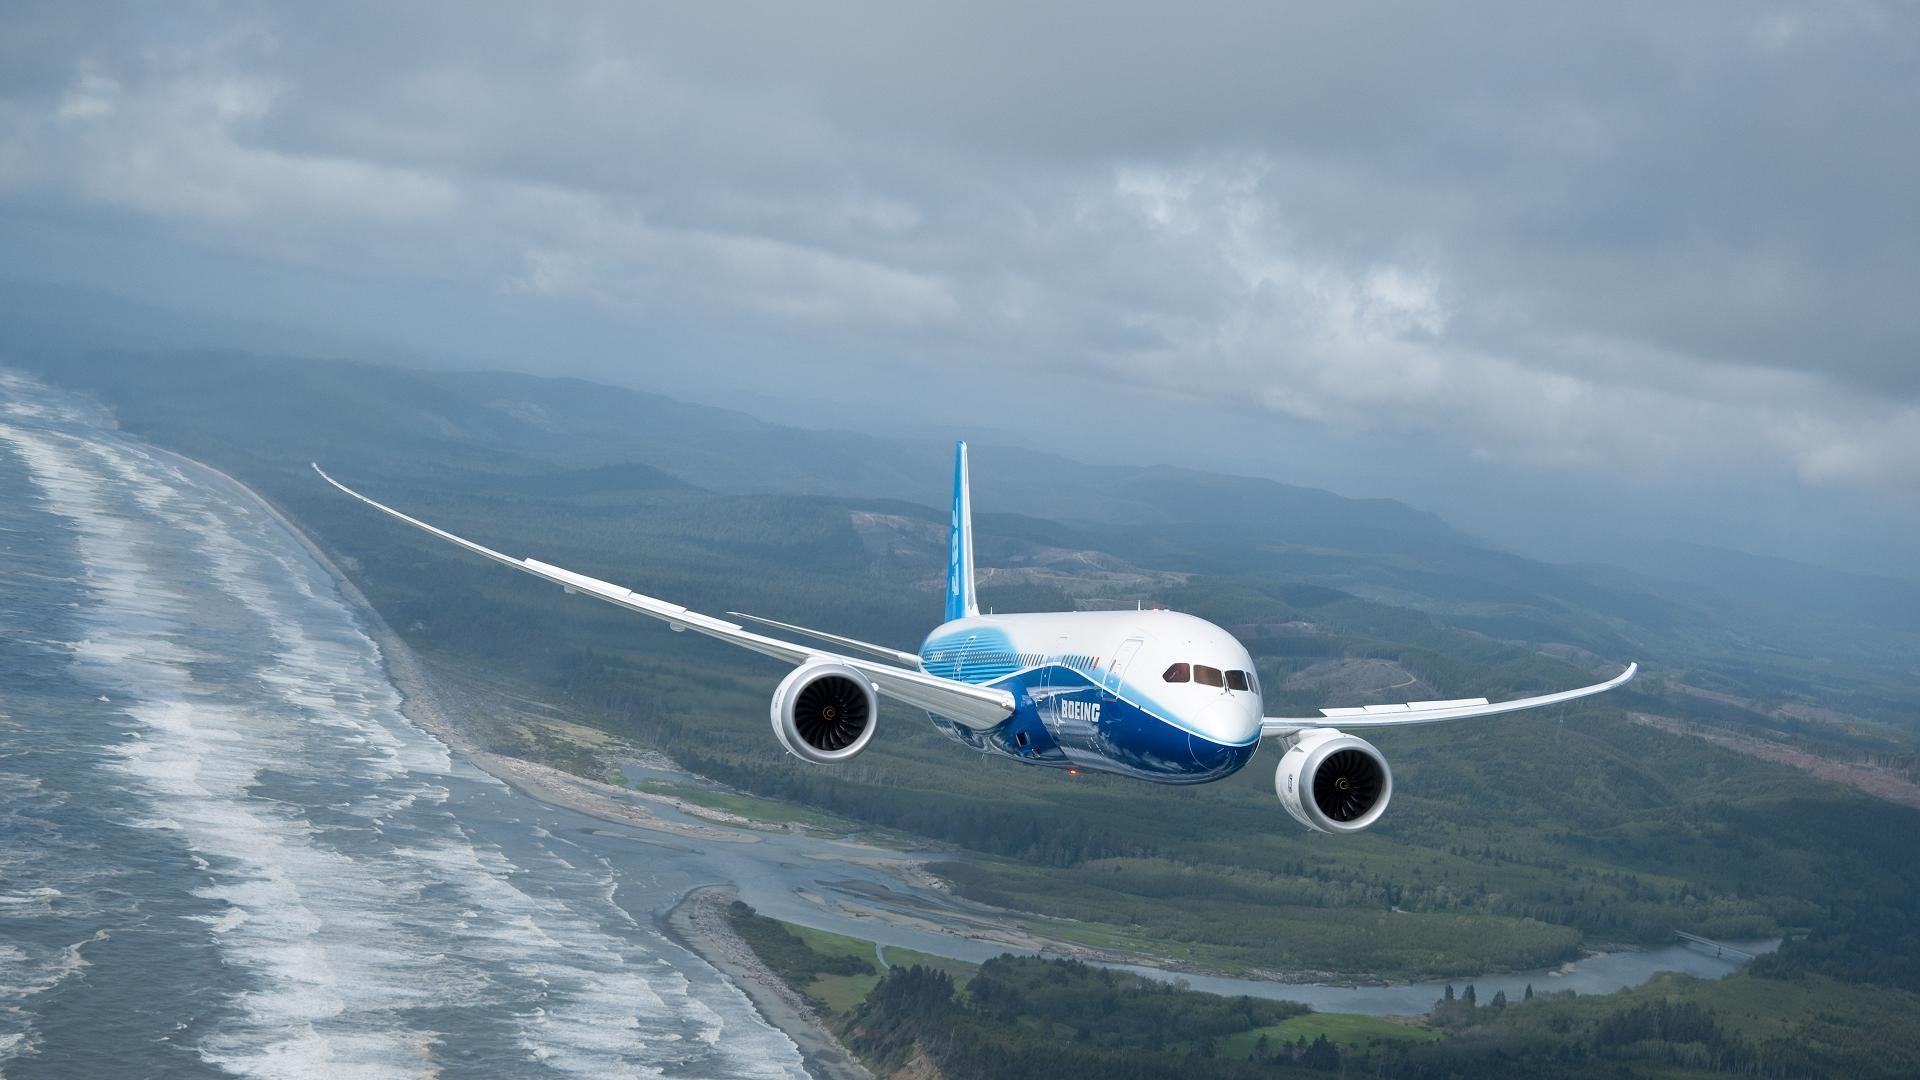 Boeing wallpapers, High-quality images, collection, Customize your device, 1920x1080 Full HD Desktop